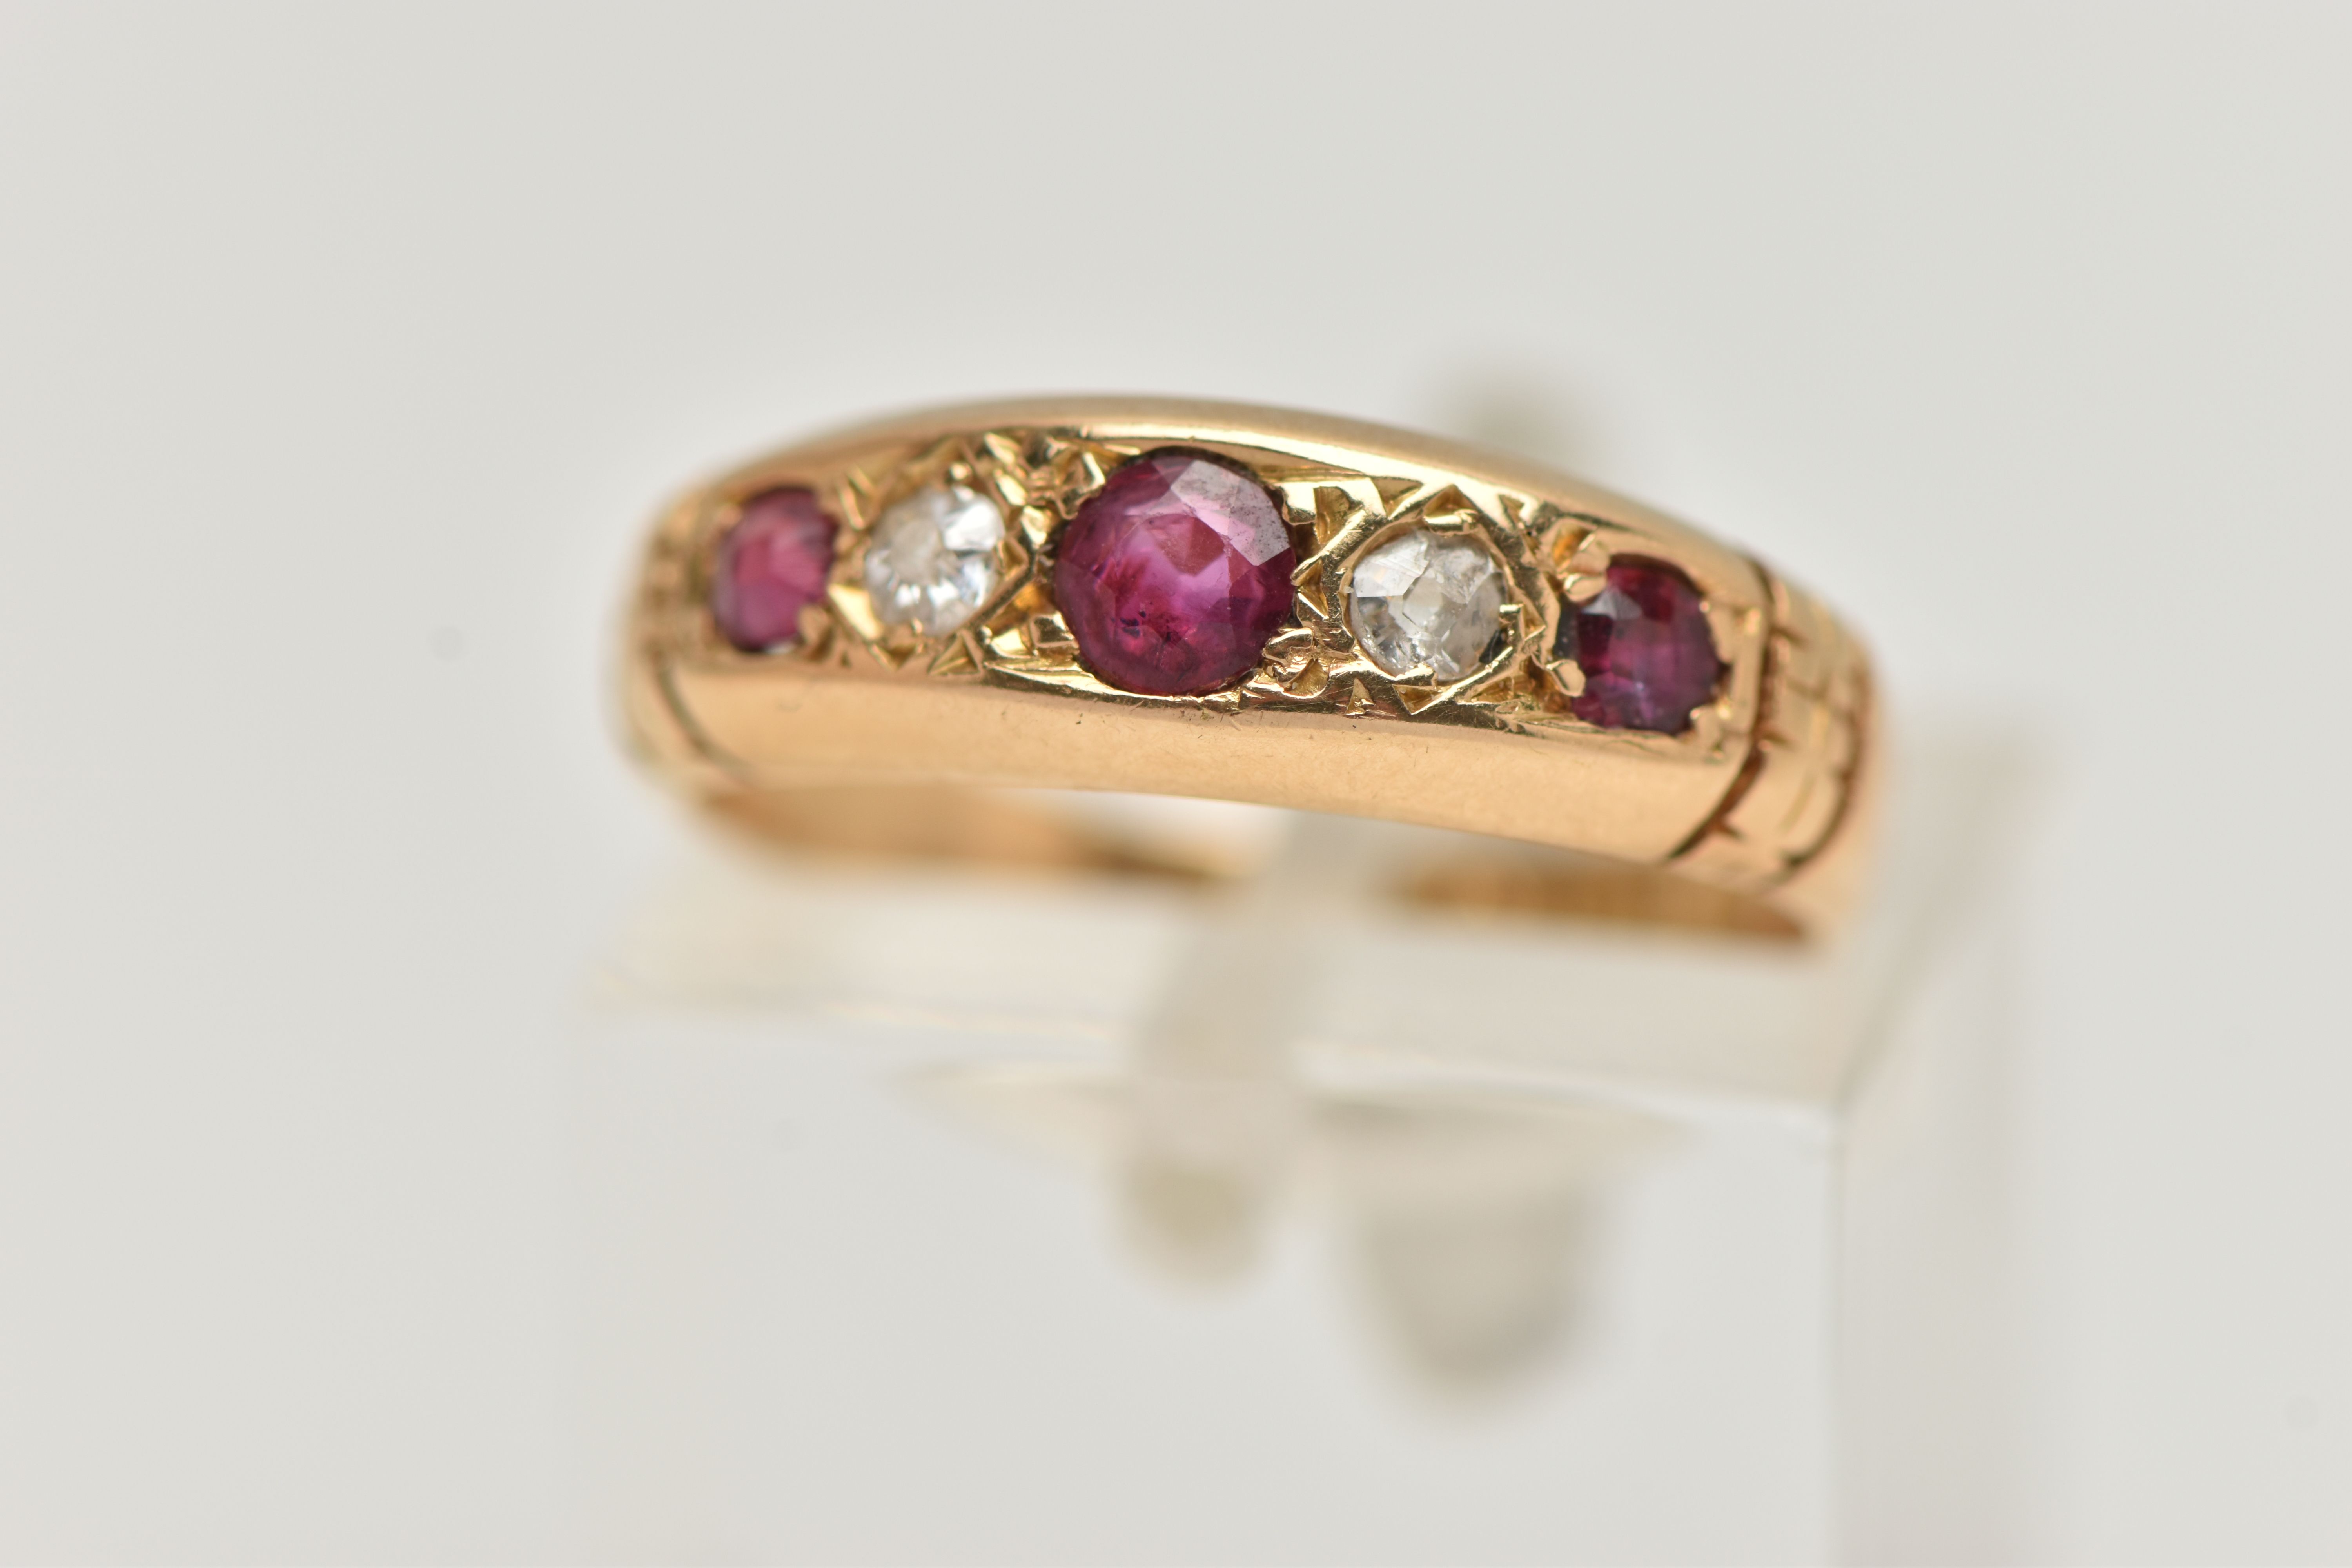 AN EARLY 20TH CENTURY, 18CT GOLD RUBY AND DIAMOND FIVE STONE RING, set with three circular cut